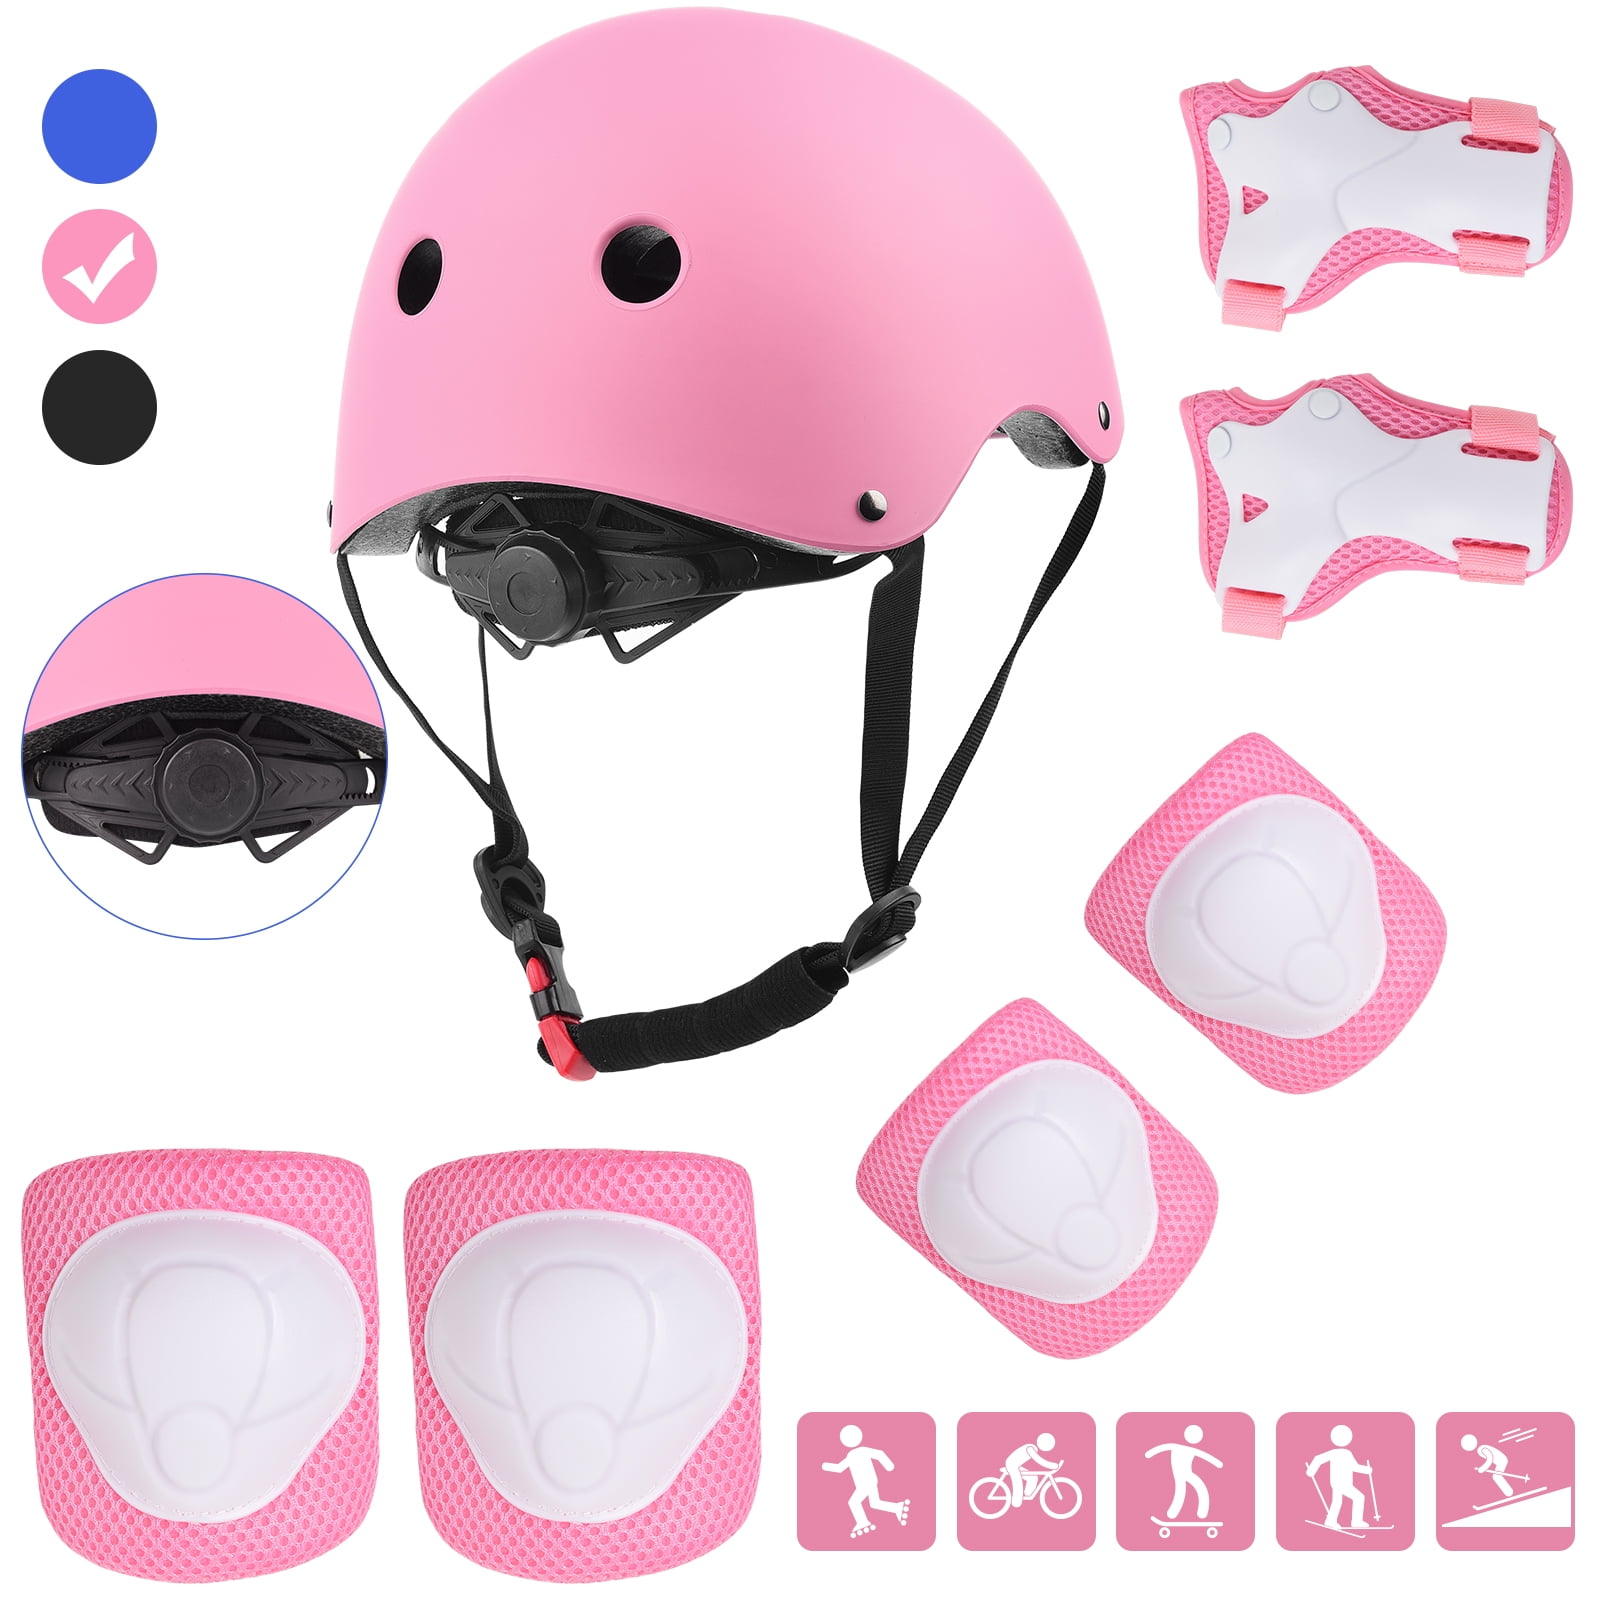 Kid Children Girls Bike Cycling Protective Scooter Skate Roller Safety Helmet PM